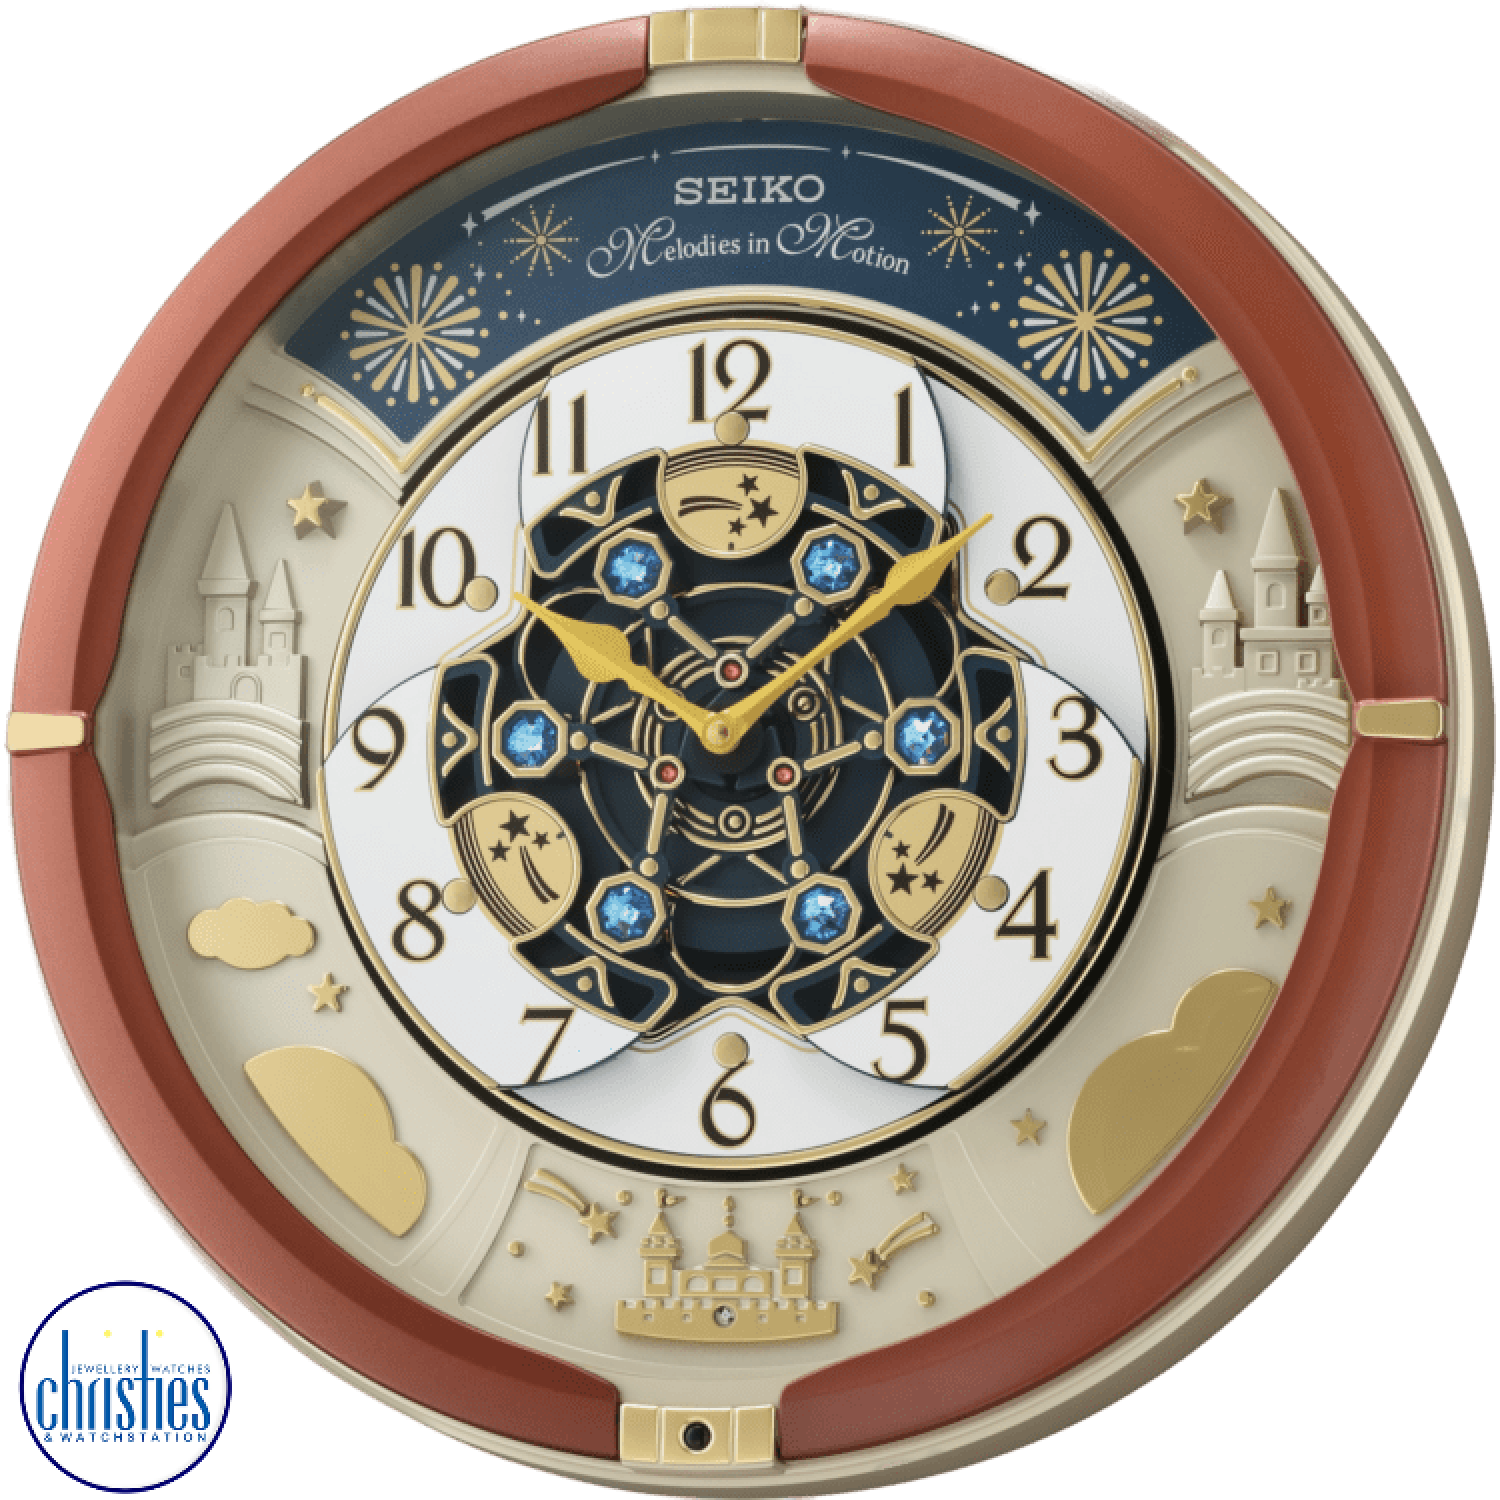 QXM378-B Seiko  Musical Motion Wall Clock. The Seiko QXM378-B Melodies In Motion clock is a stunning timepiece that combines functionality and style.